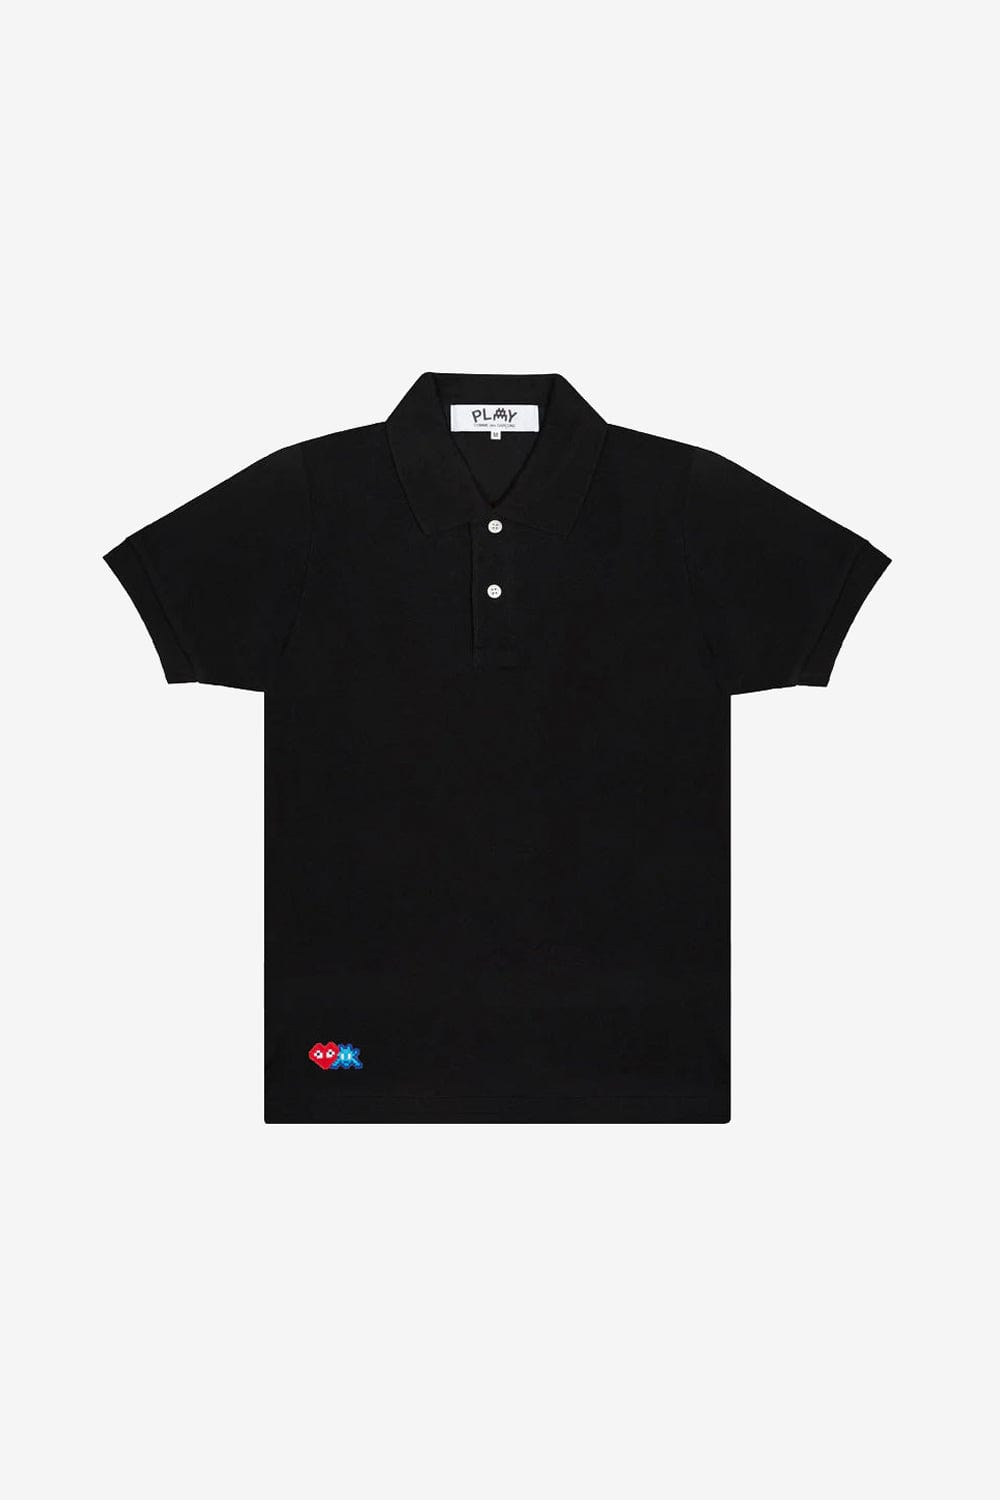 T336 Invader Polo Shirt